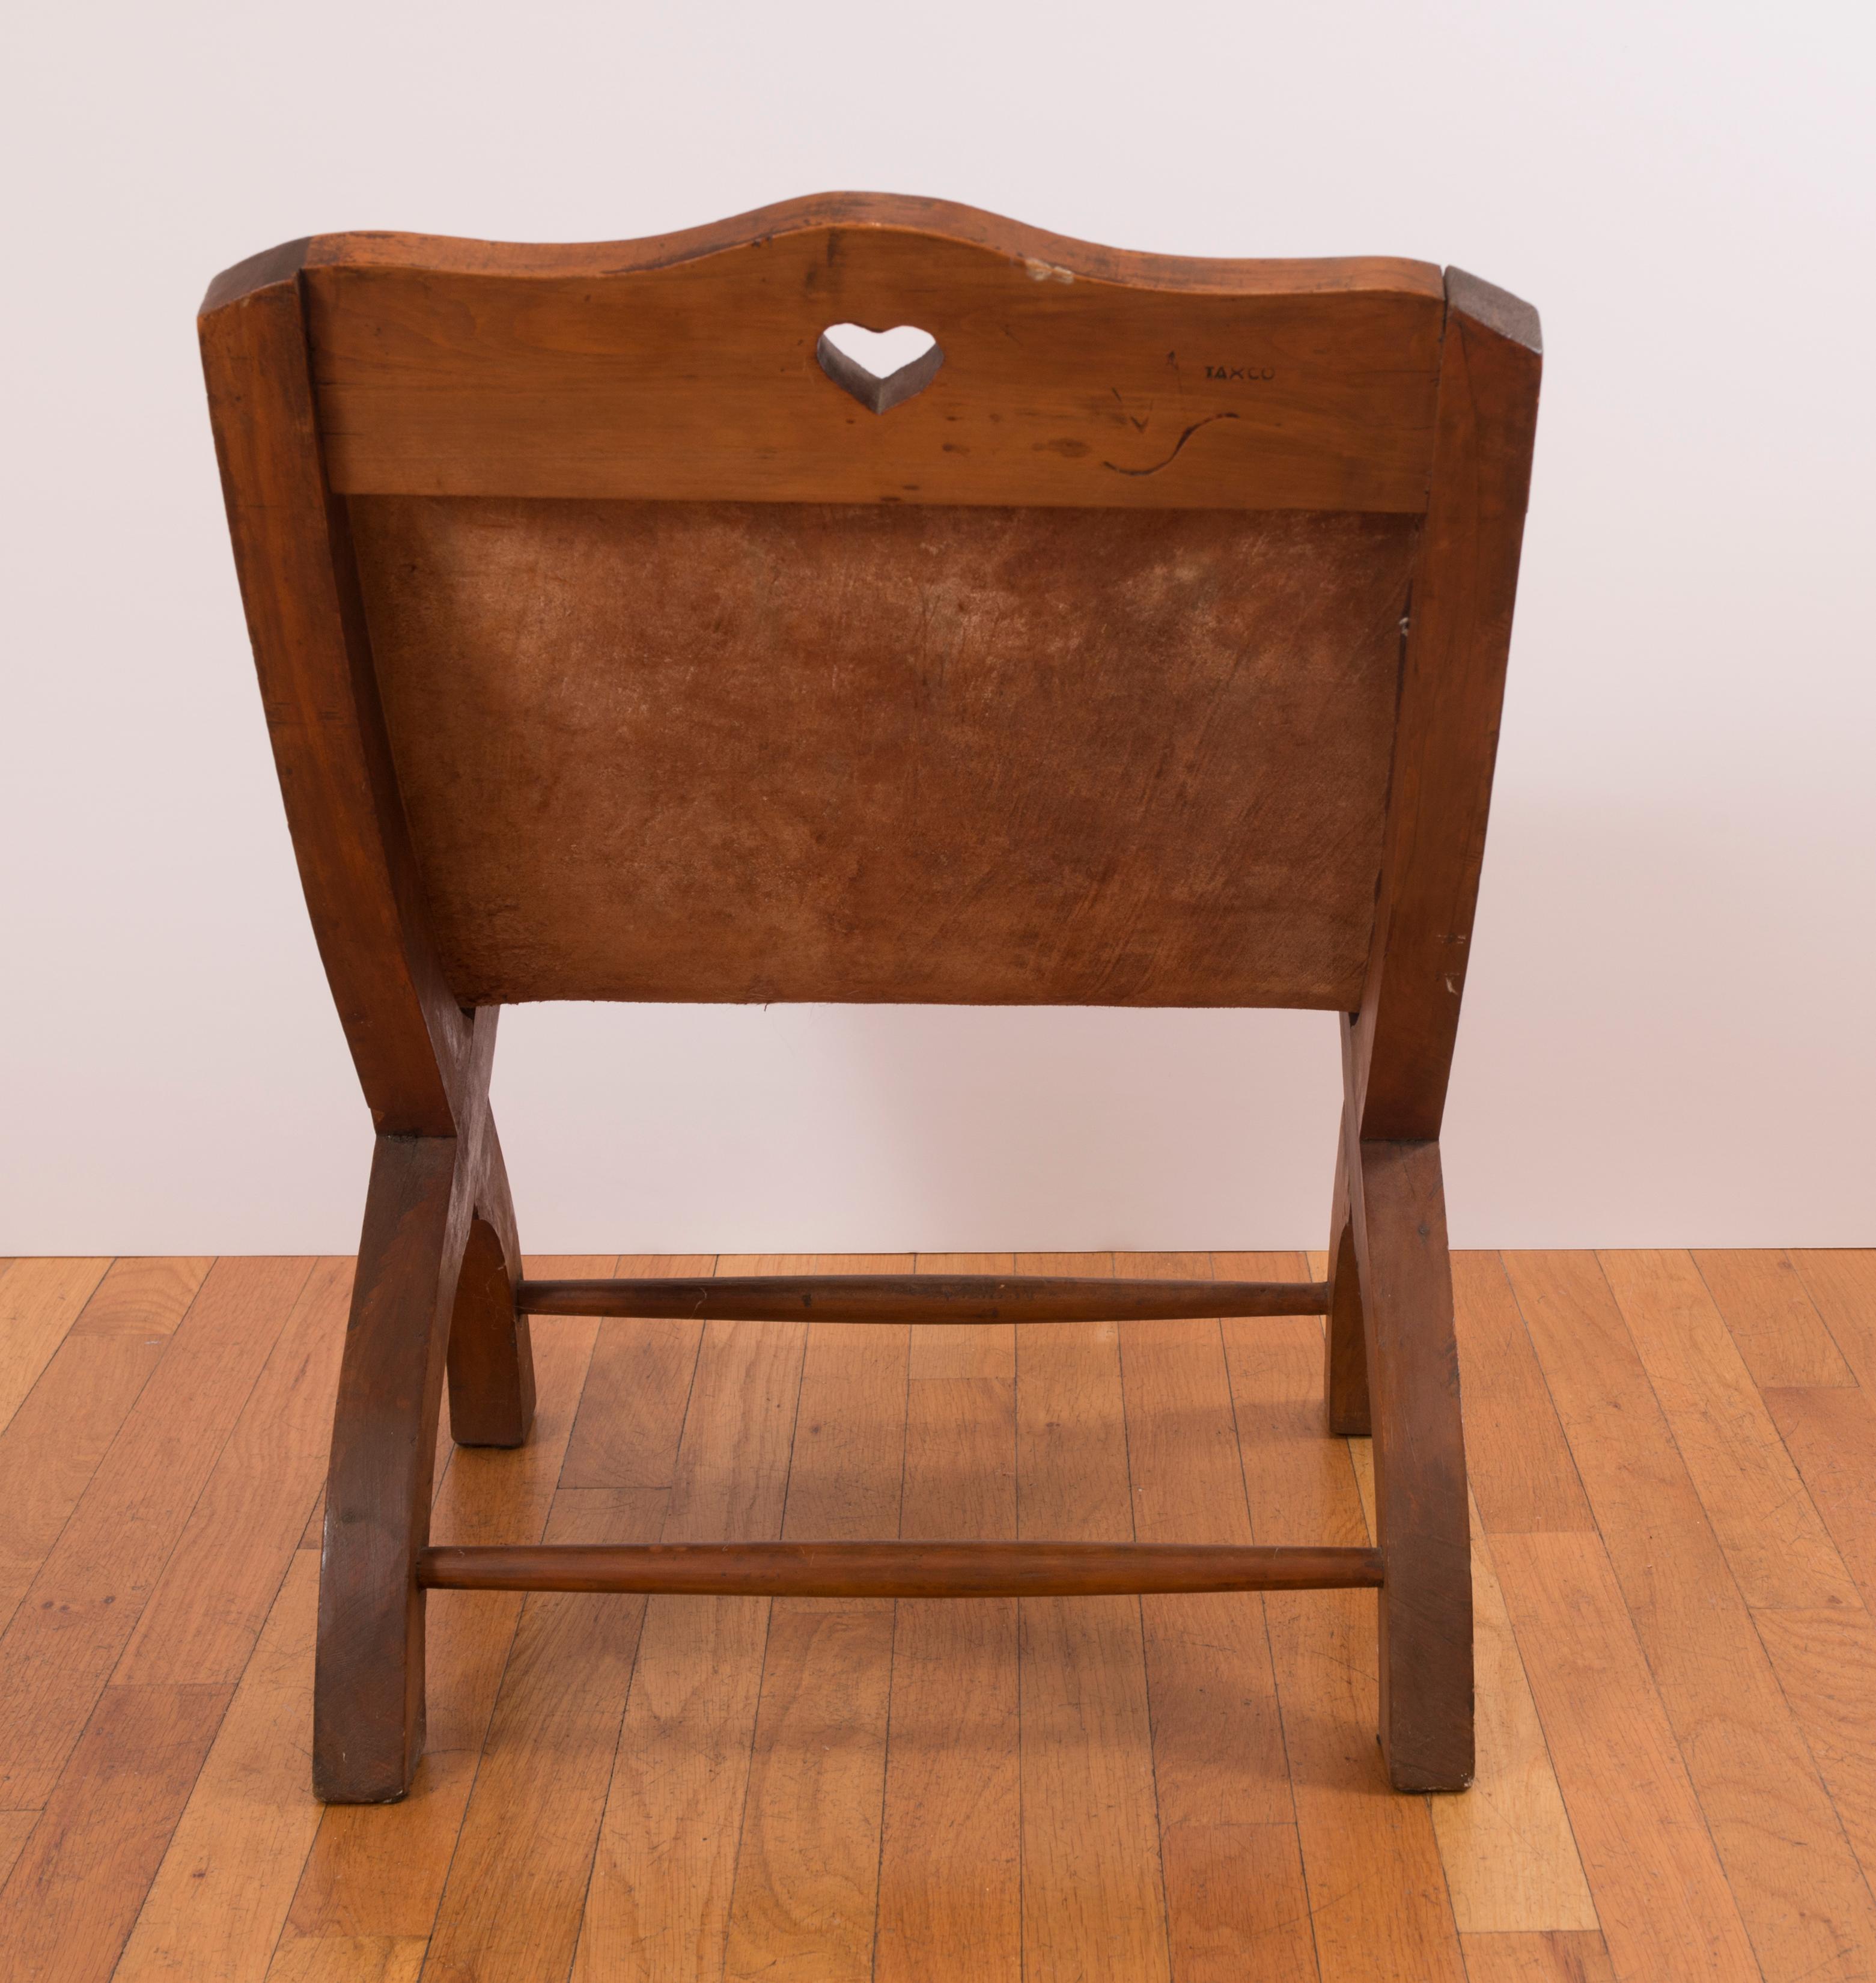 Sabino wood and tanned leather scoop seat secured by hand-hammered tacks.